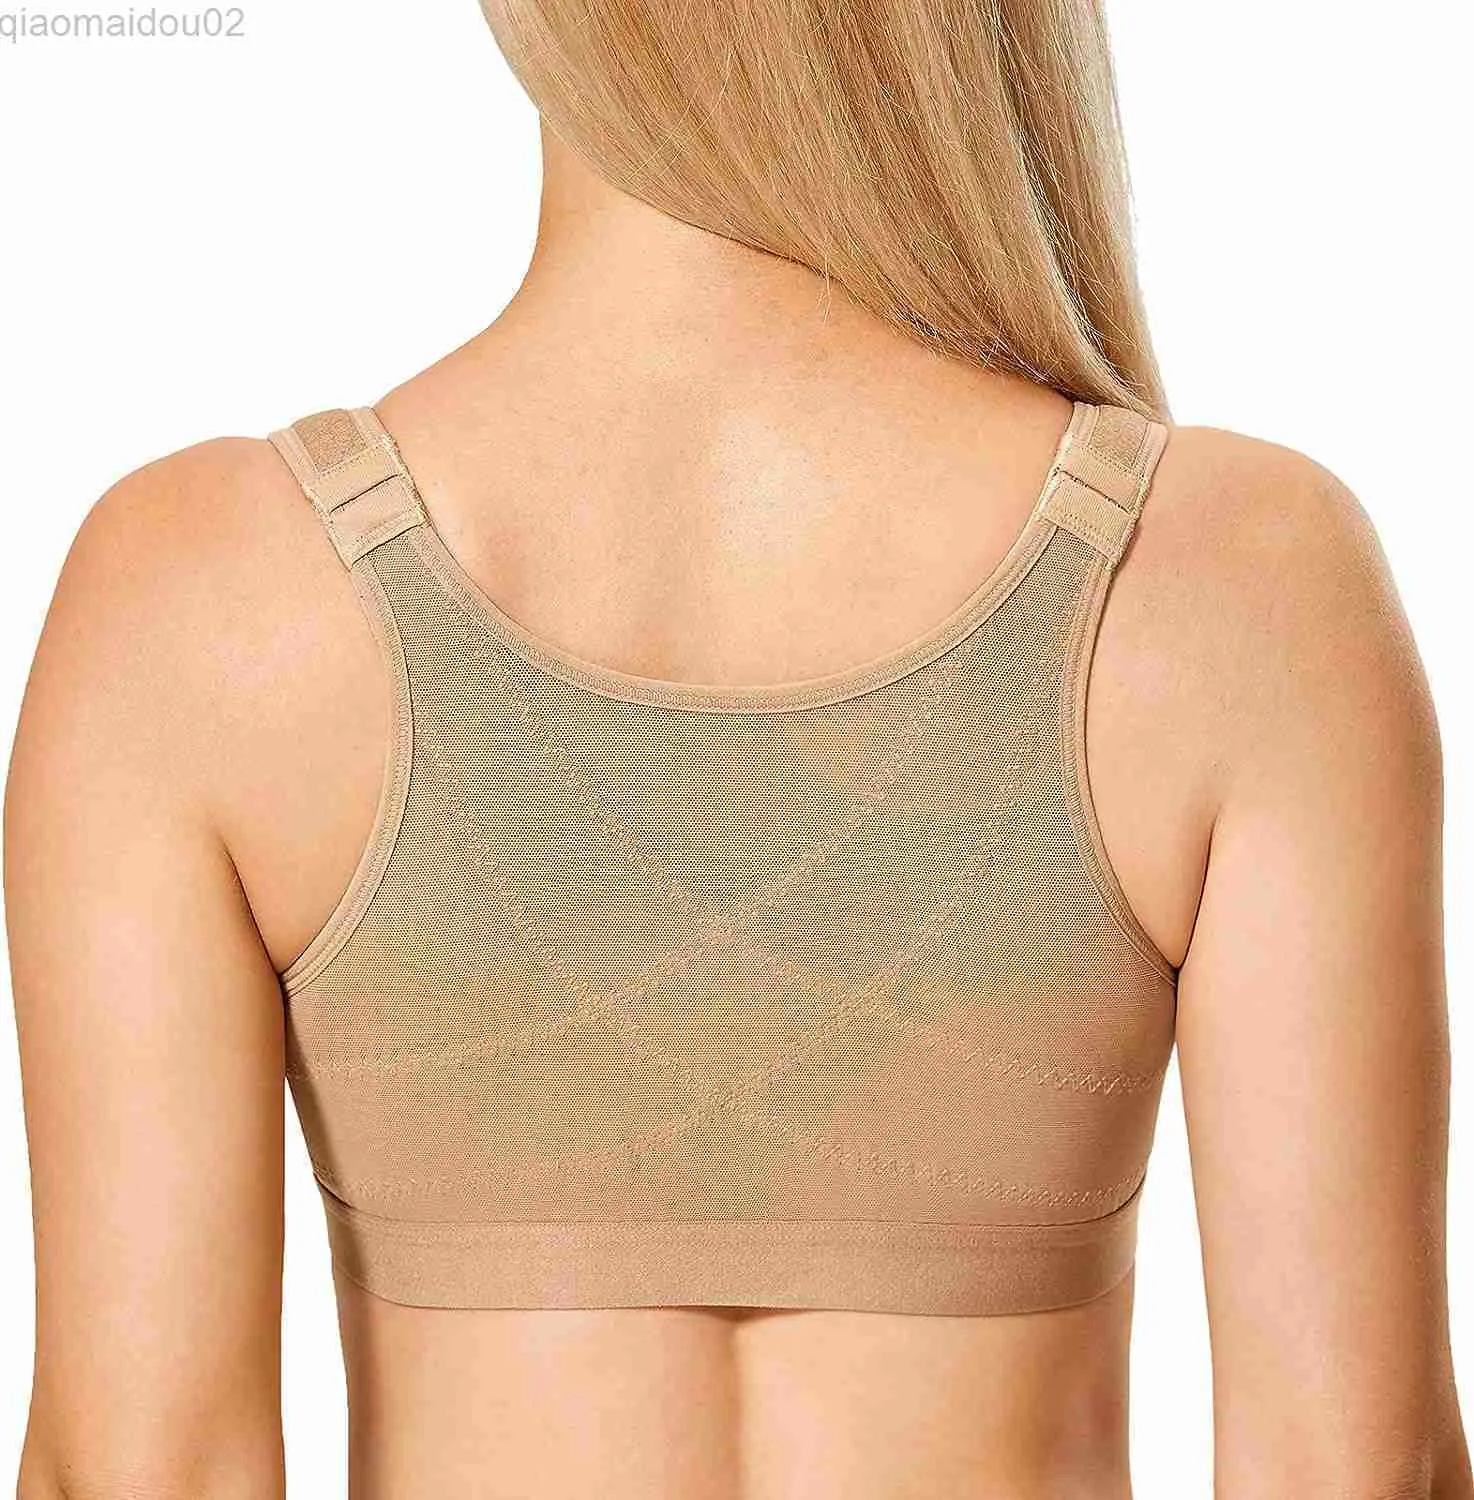 DELIMIRA Women's Full Coverage Front Closure Back Support Posture